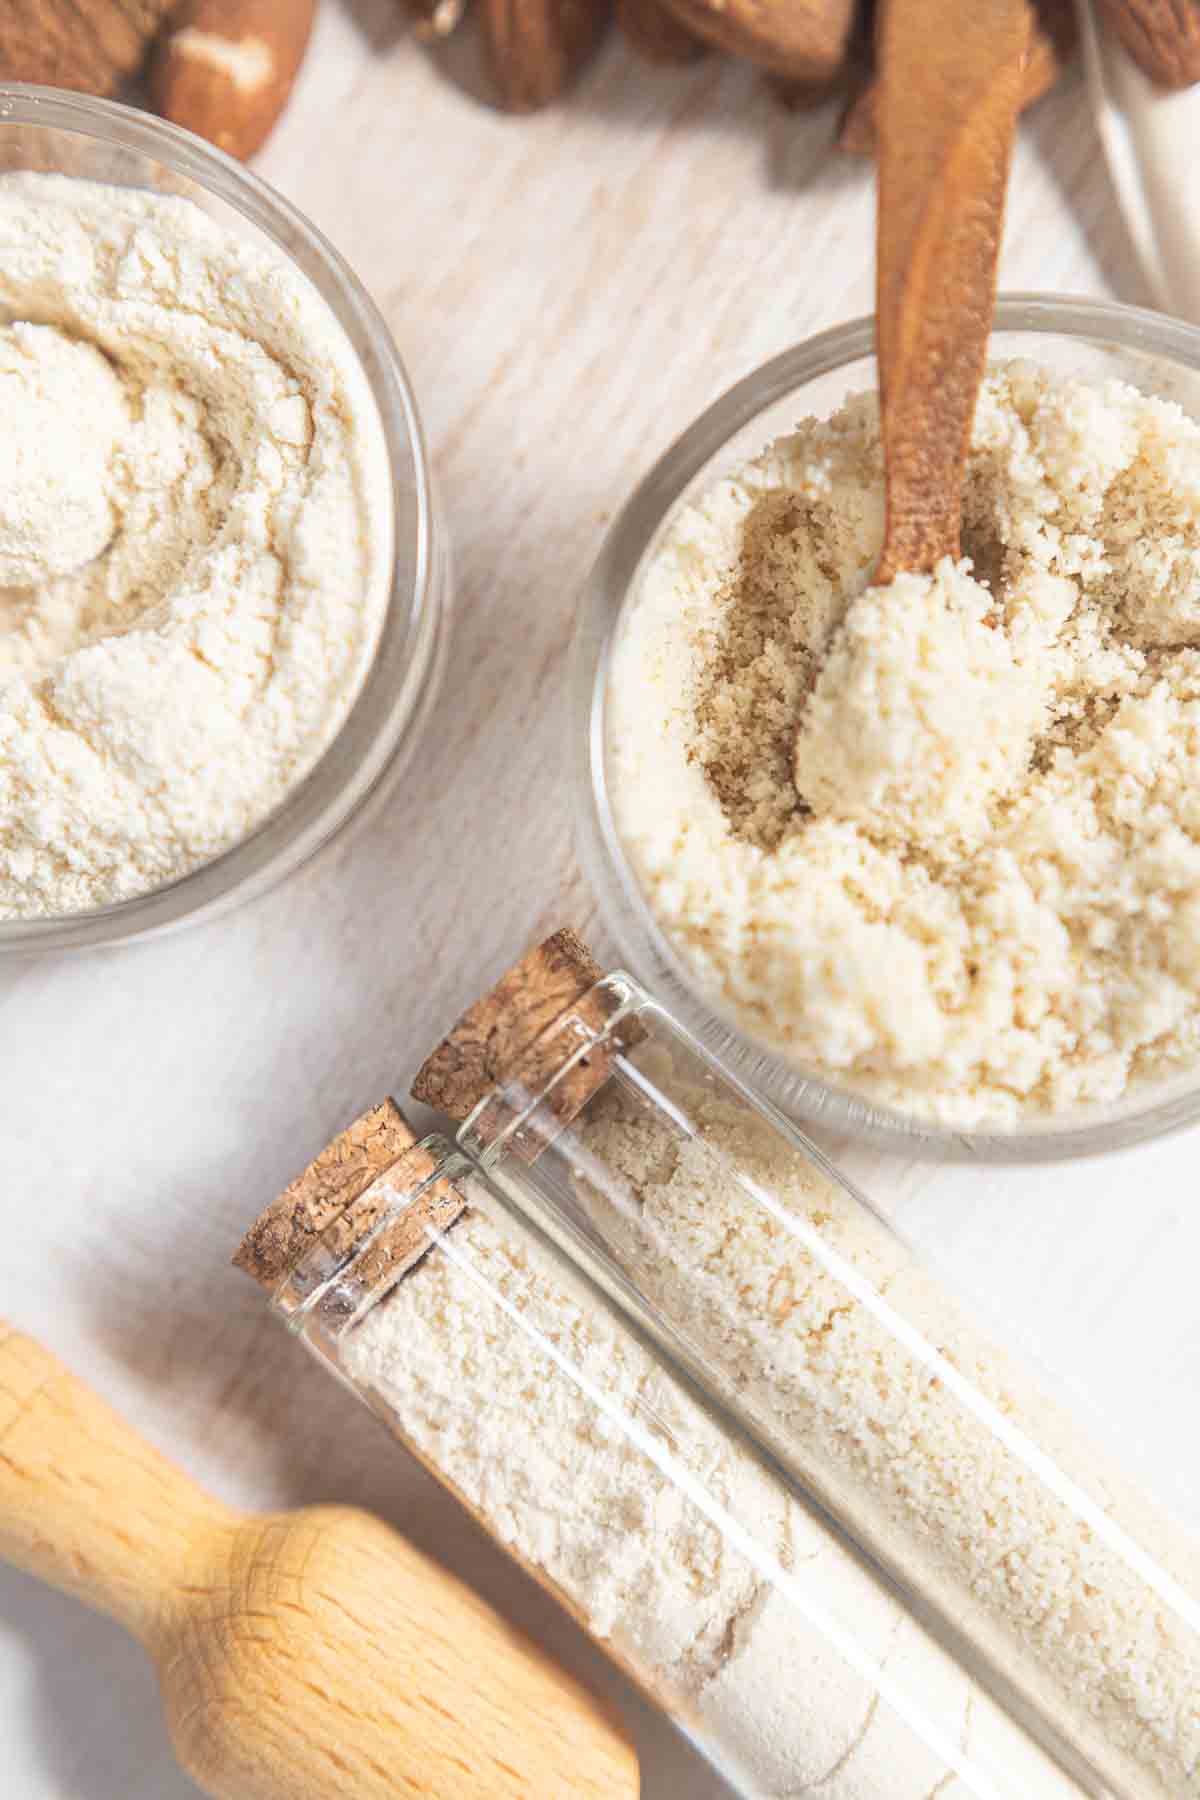 Best uses for almond flour and coconut flour on the wooden board.